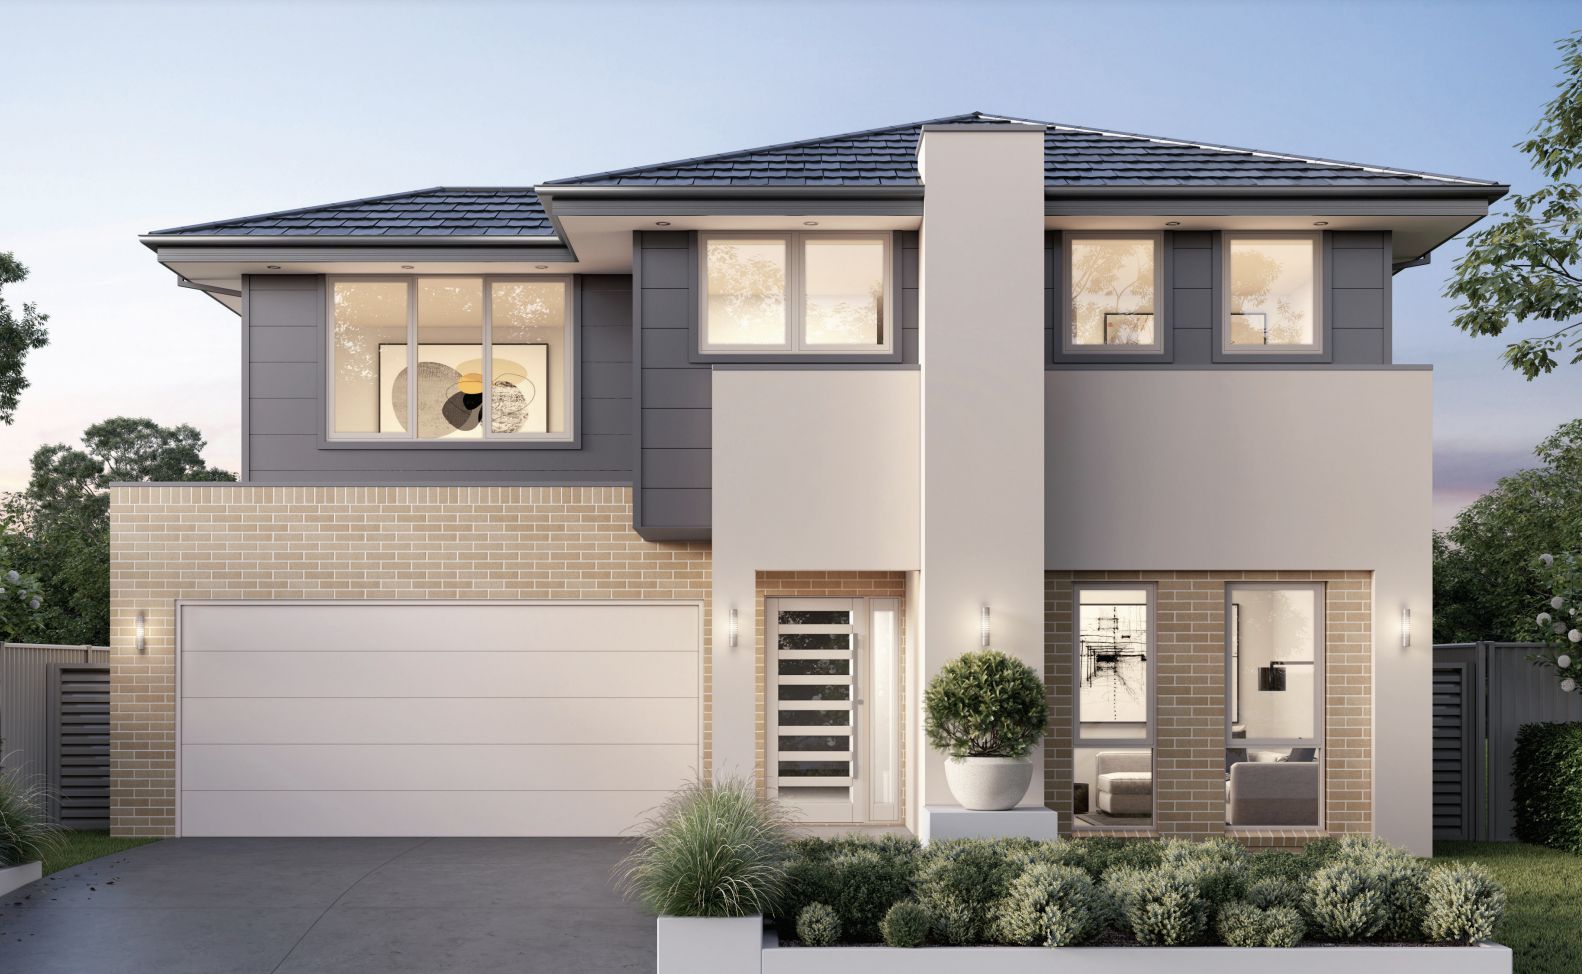 4 bedrooms New House & Land in TBA Box Hill BOX HILL NSW, 2765